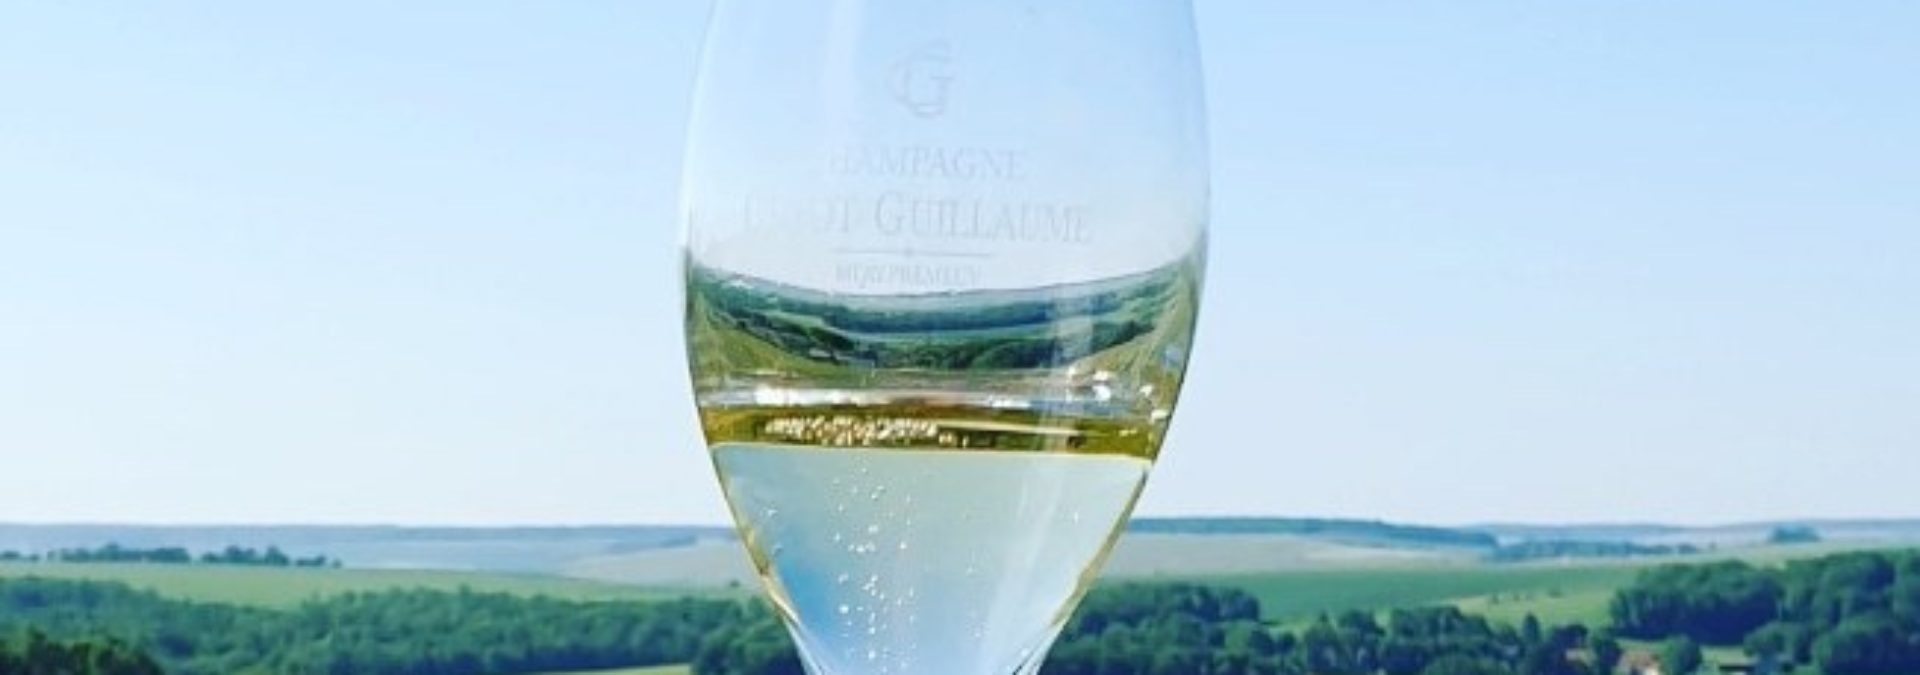 Champagne Guyot-Guillaume